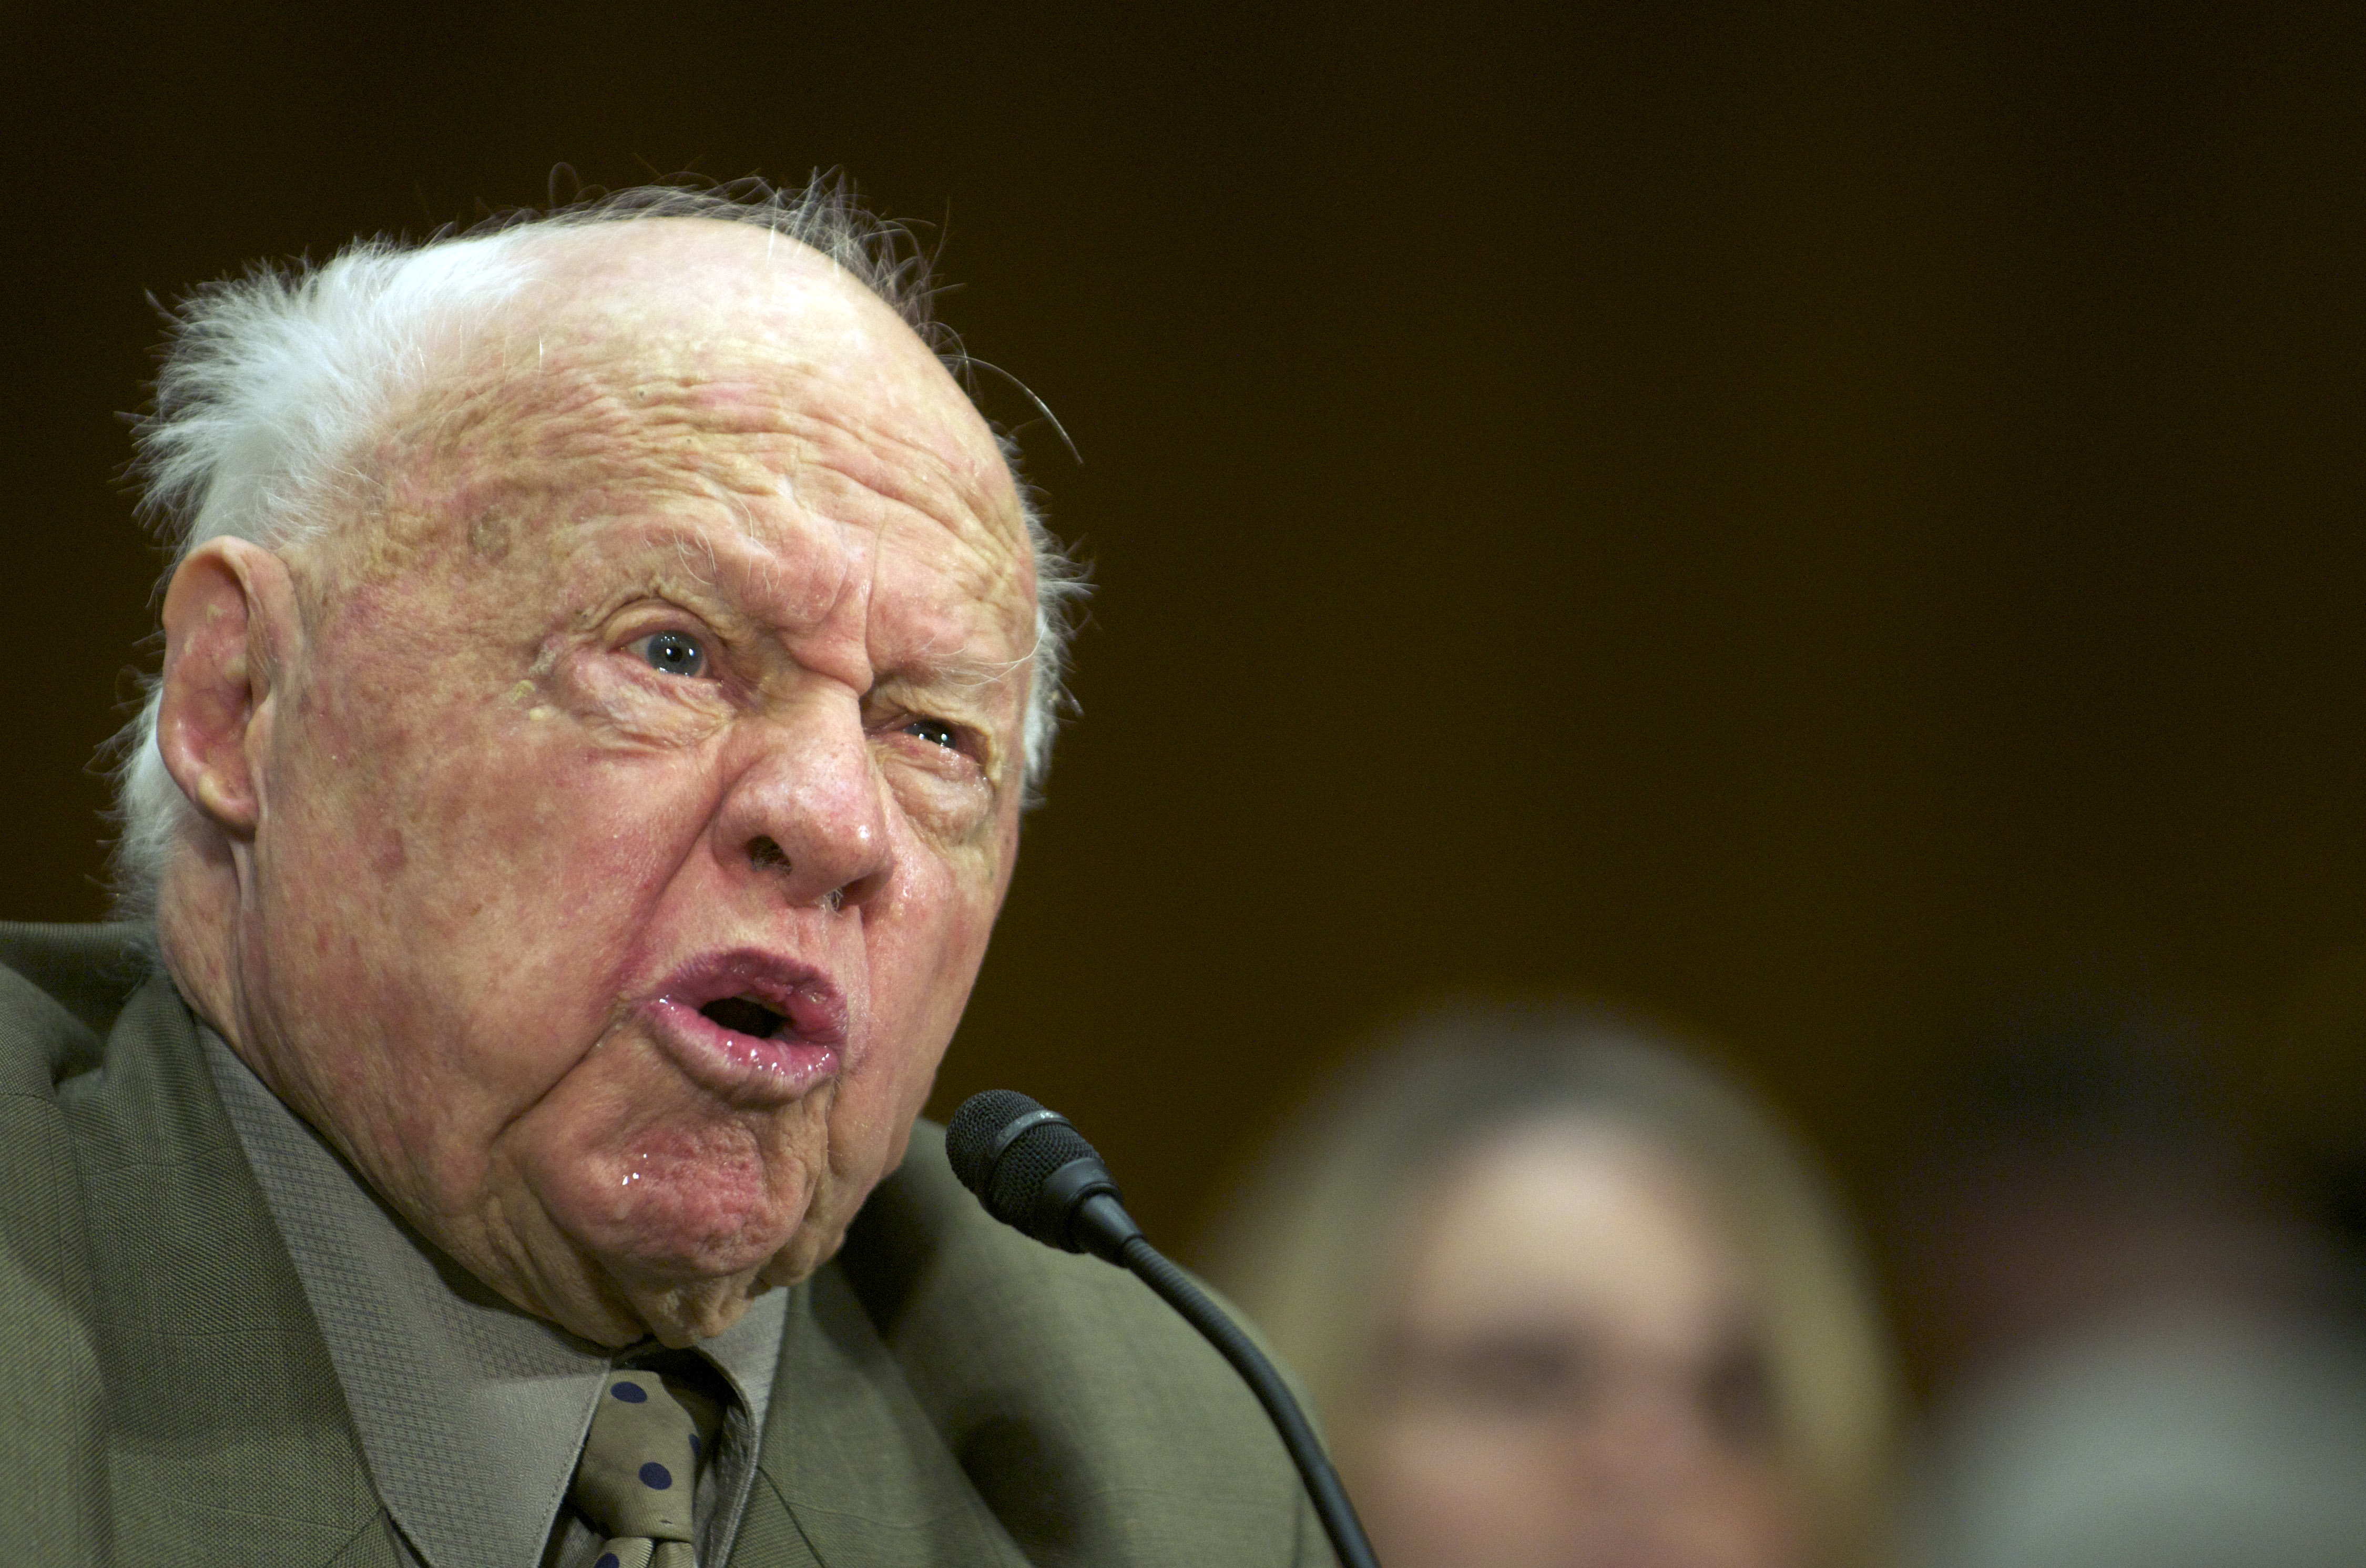 Mickey Rooney during the "Ending Neglect Financial Elder Abuse" event in the Dirksen Senate Office Building on Capitol Hill in Washington, DC, March 2, 2011. | Source: Getty Images